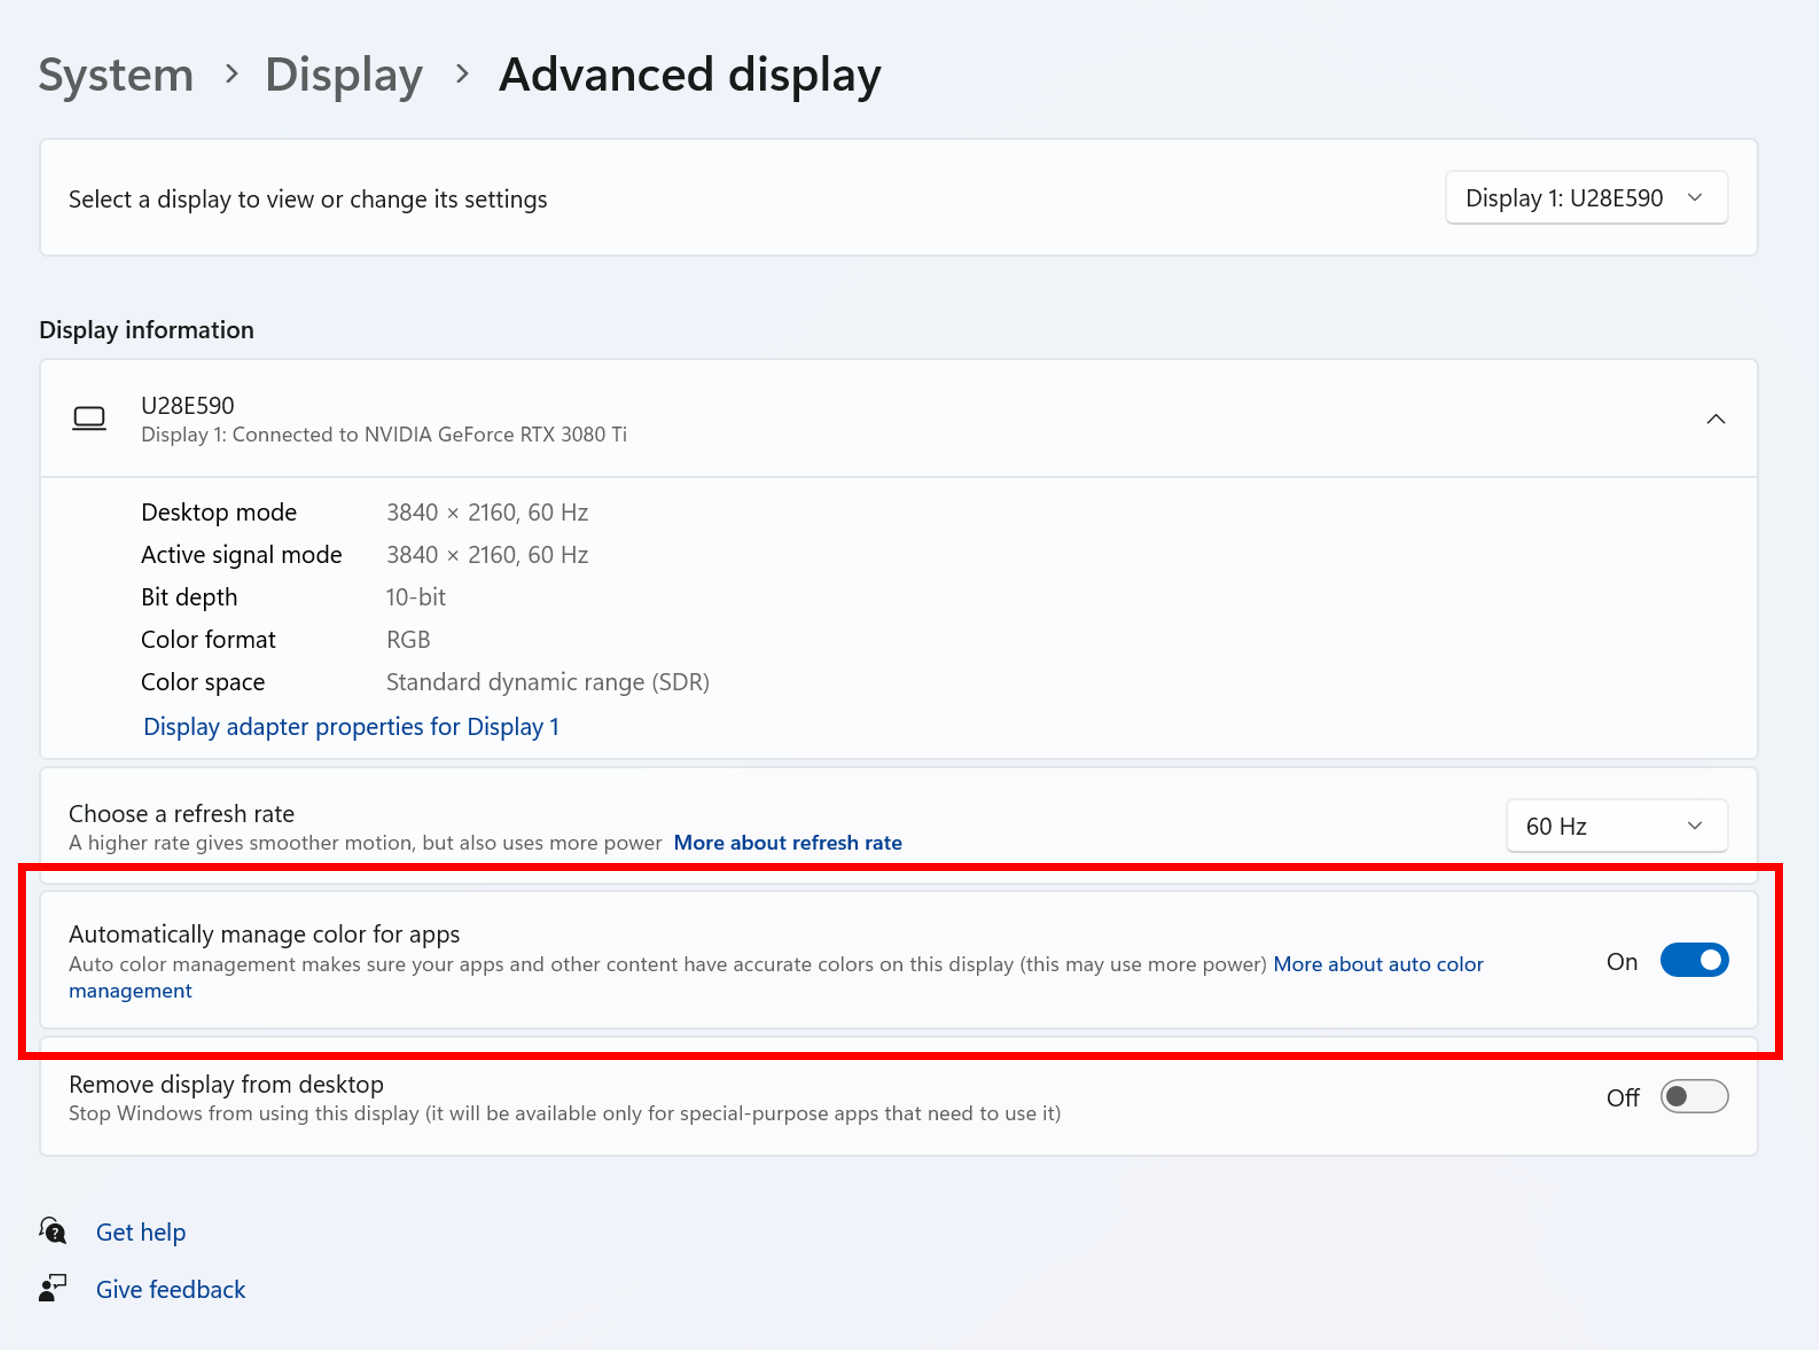 Auto Color Management setting in the Advanced display settings page